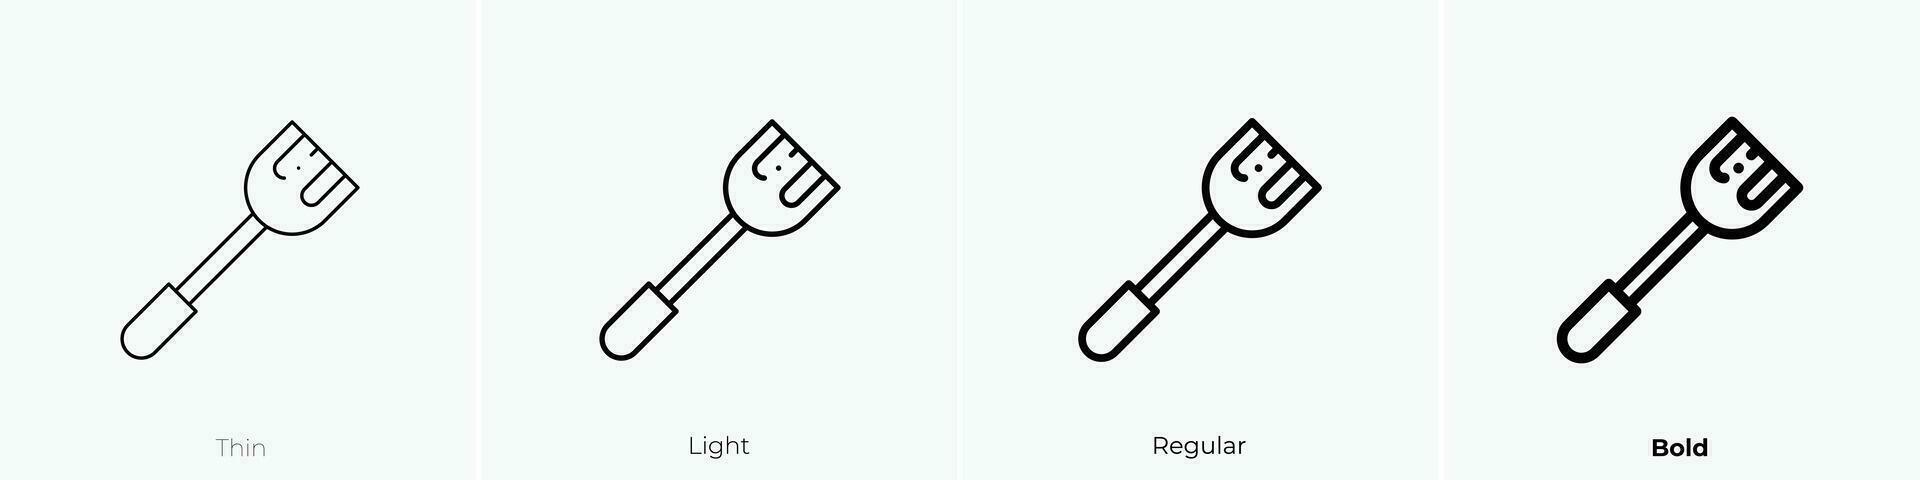 spatula icon. Thin, Light, Regular And Bold style design isolated on white background vector